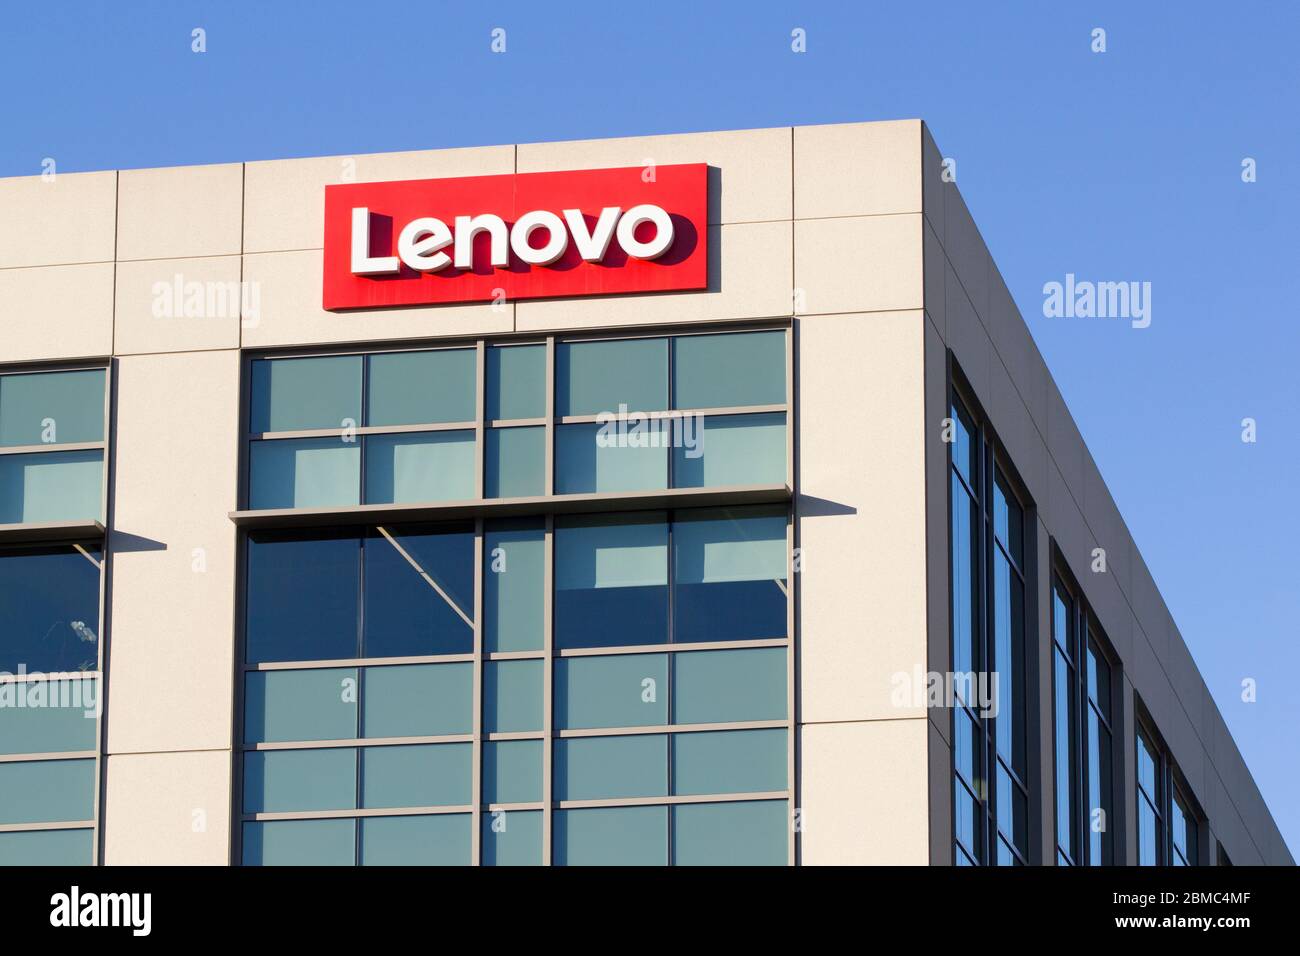 The Lenovo sign is seen at Lenovo Santa Clara office on Feb 7, 2020. Lenovo Group Limited is a Chinese multinational technology company. Stock Photo